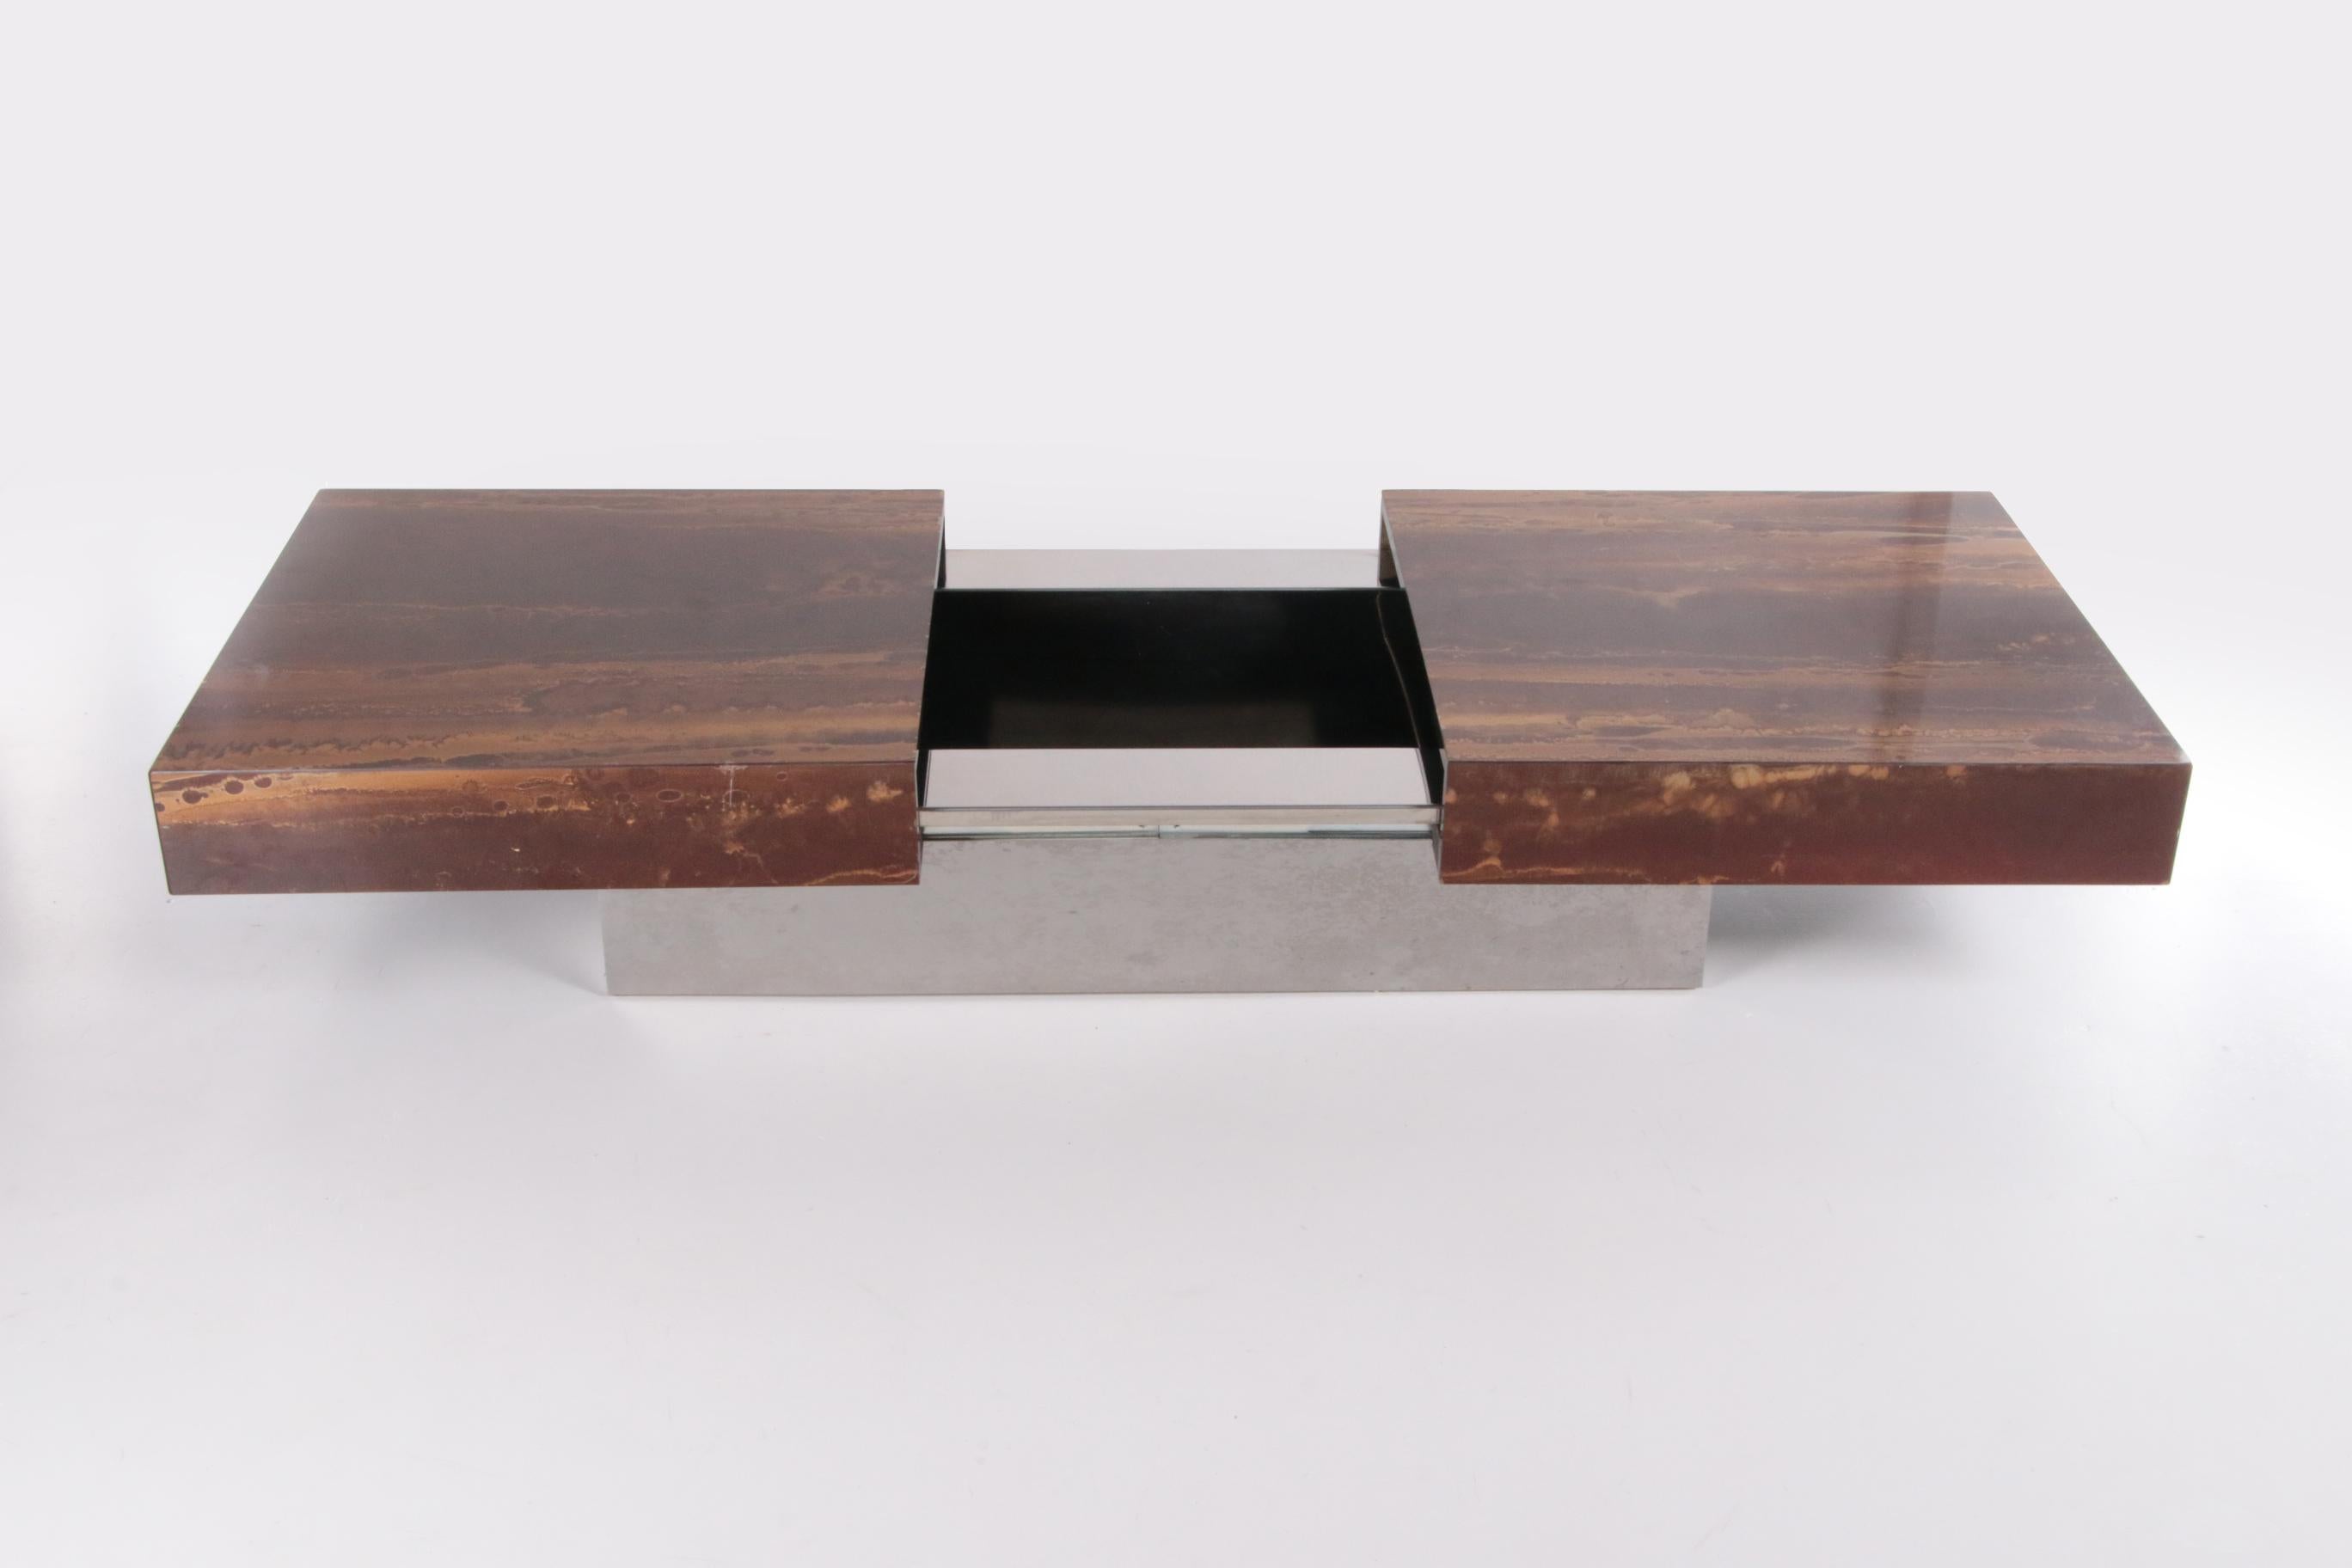 A beautiful coffee table designed by Aldo Tura in the 1970s. The table is made of wood with a beautiful pattern and finished with a high-gloss lacquer.

The tabletops on this table can slide to the left and right to reveal the bar inside. This space